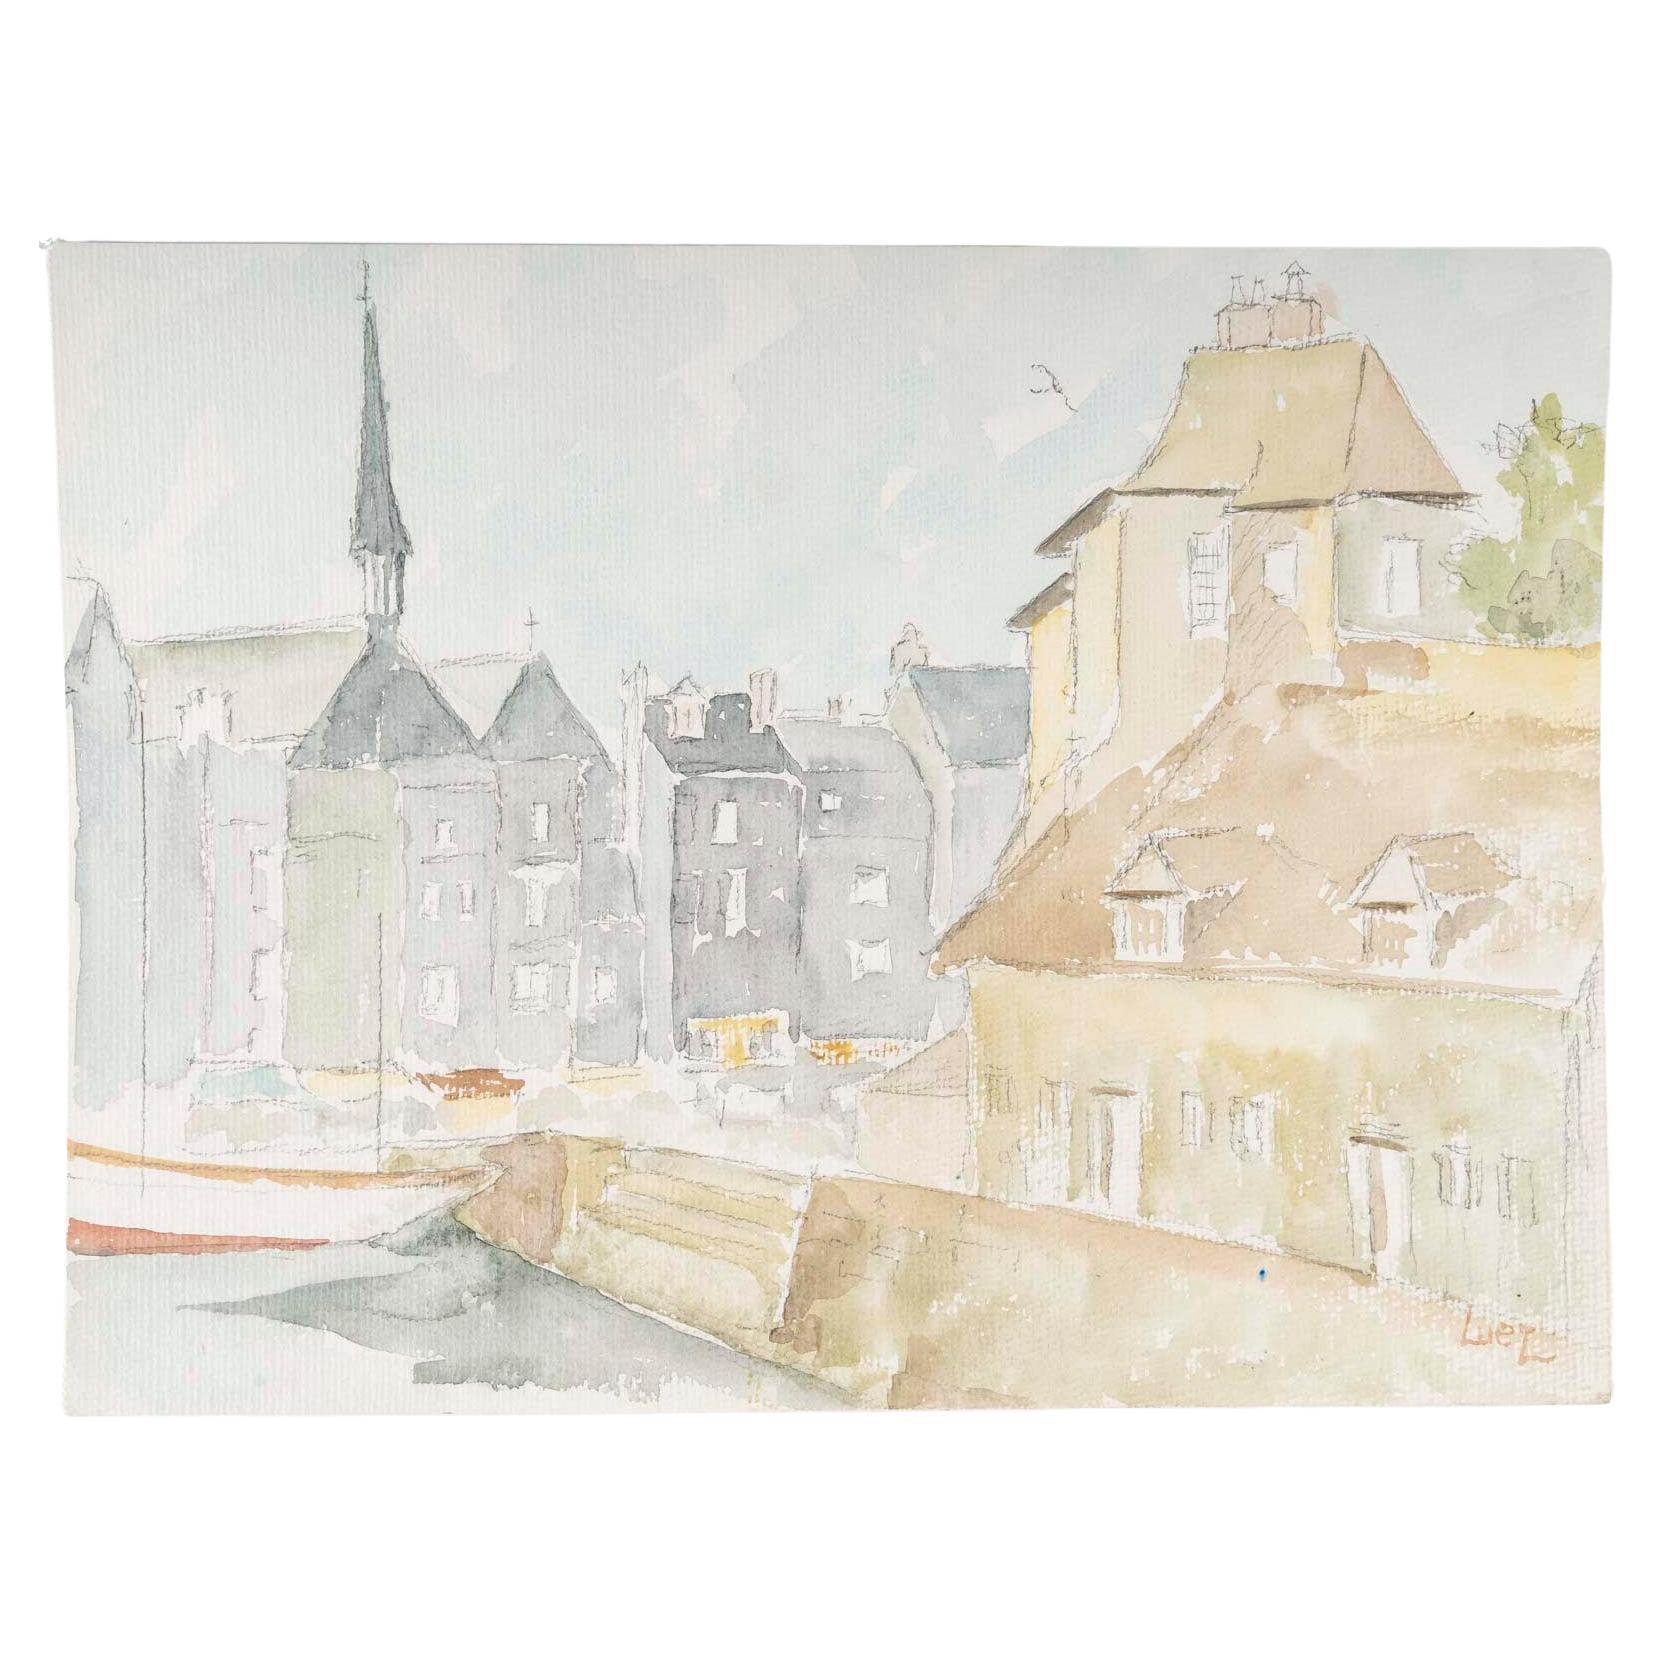 Watercolour on Paper Depicting a City and its Canal, 1980.